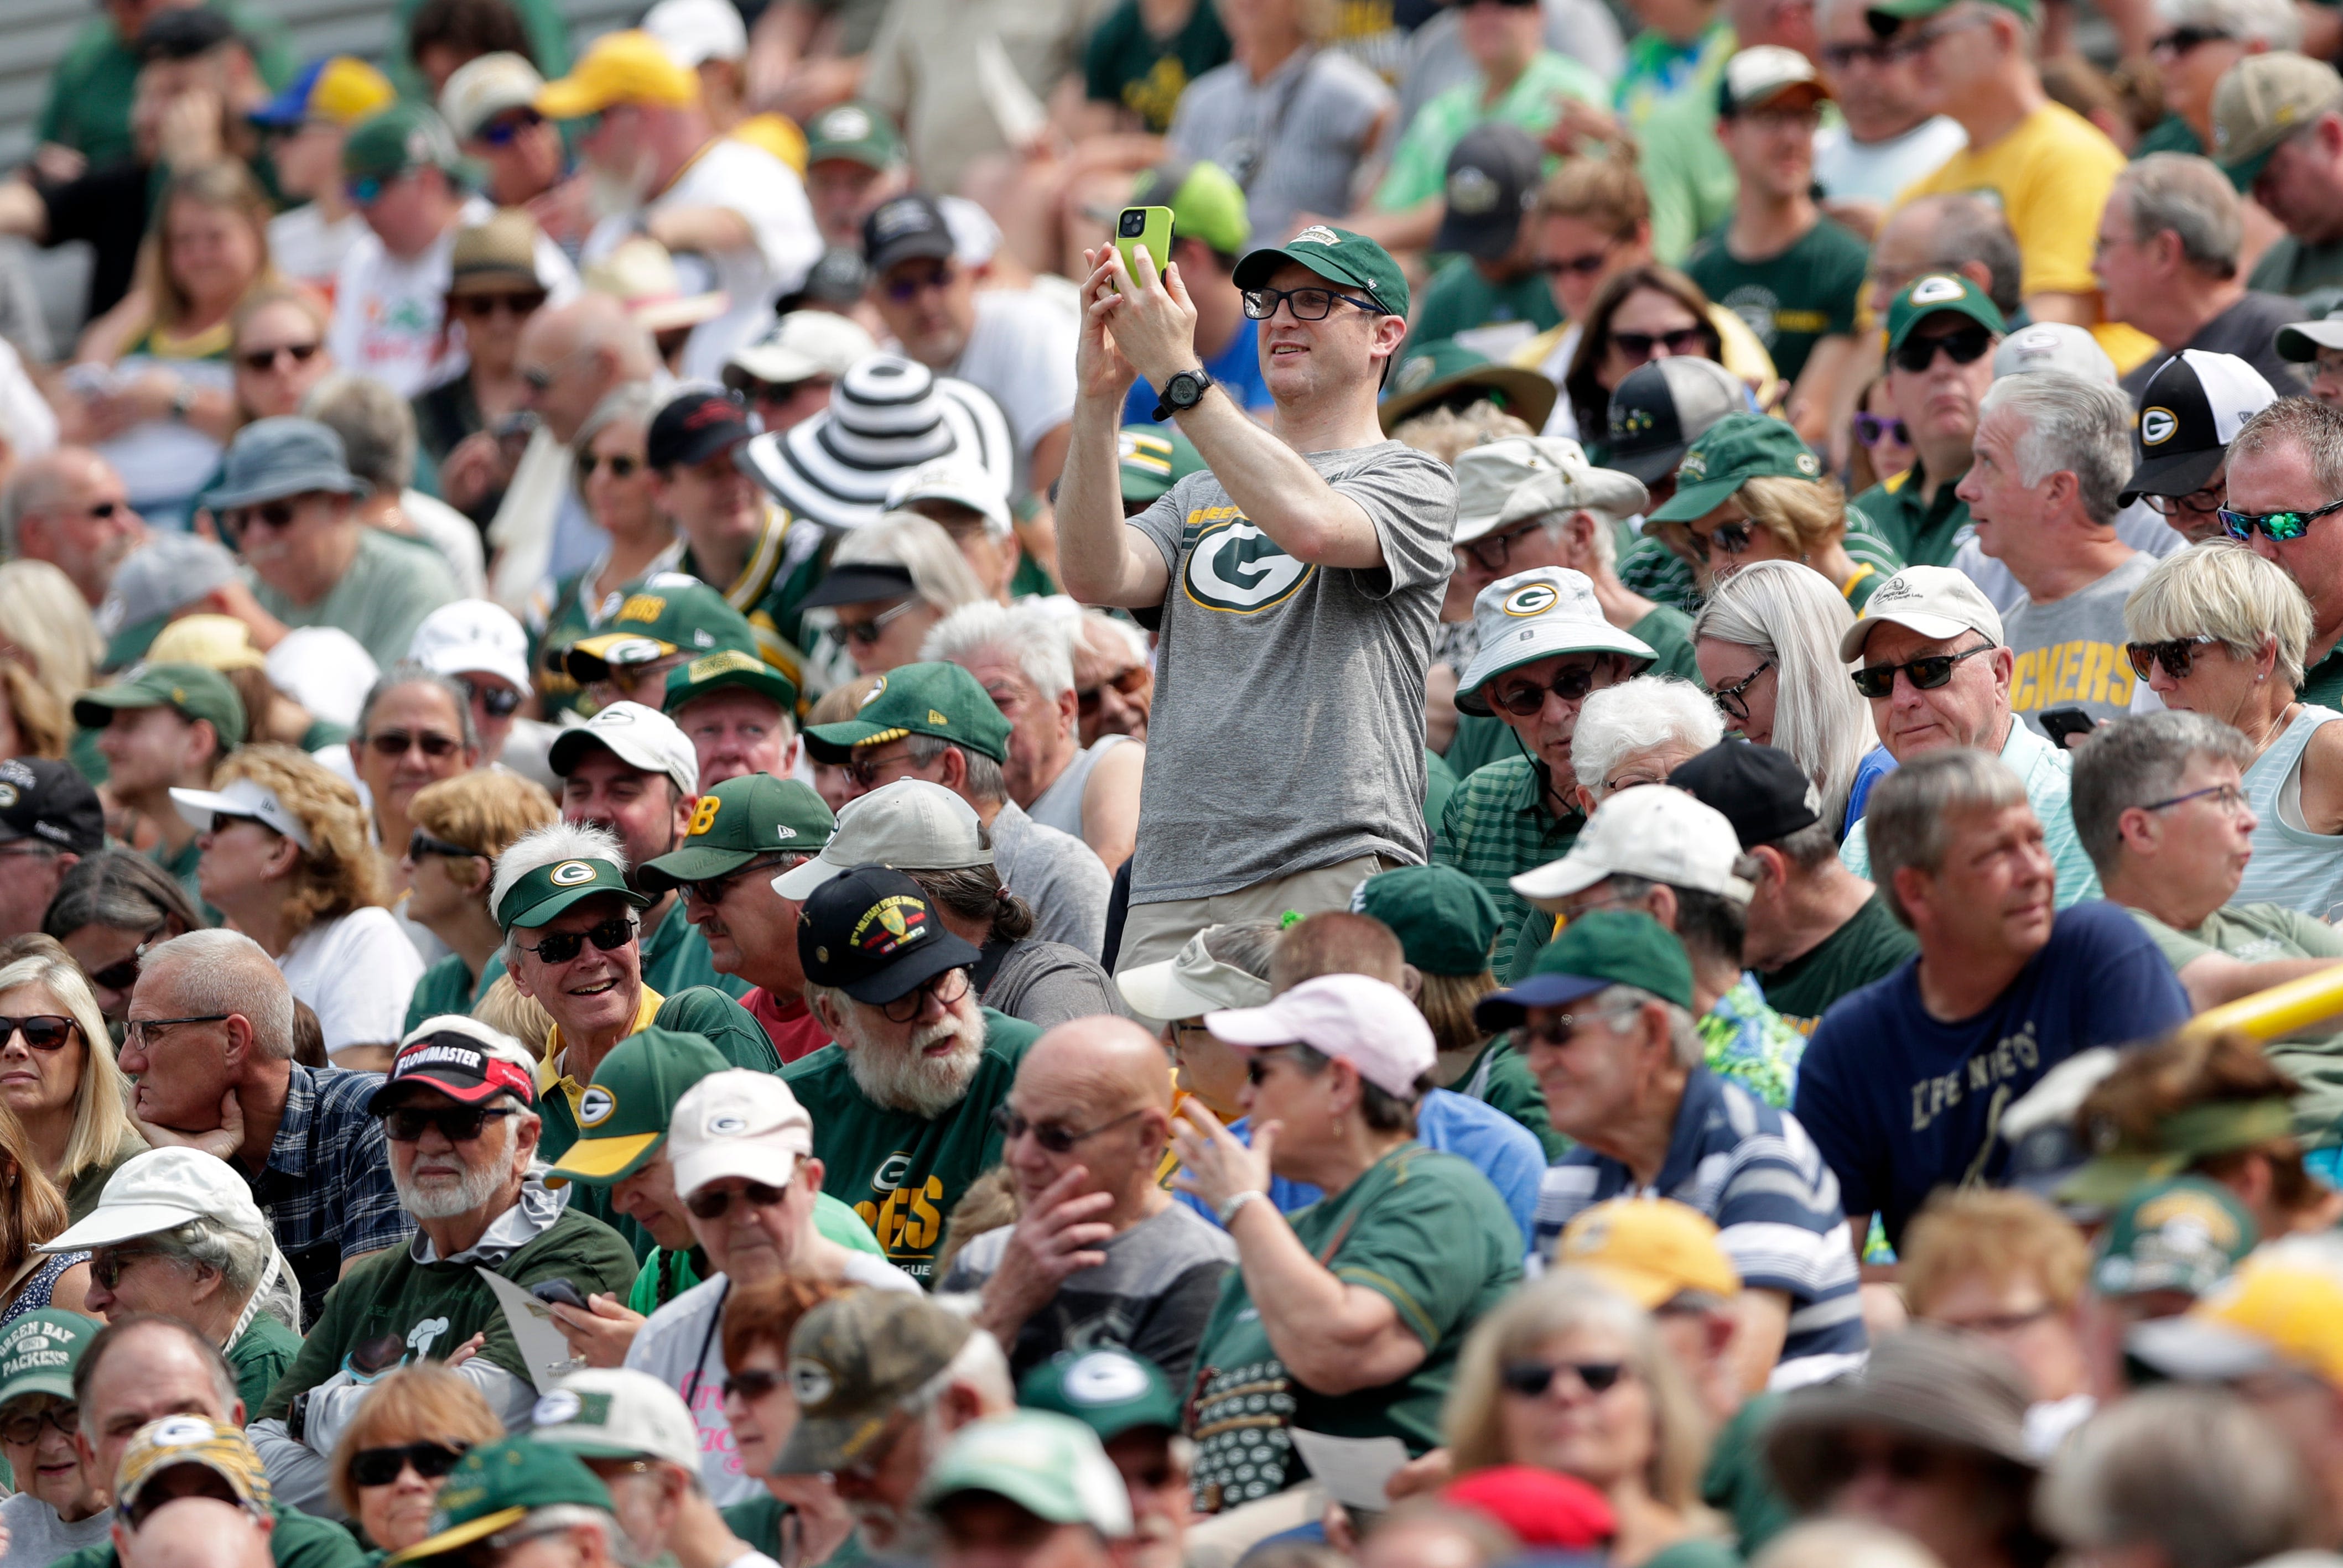 Packers schedule rare afternoon shareholders meeting after start of training camp